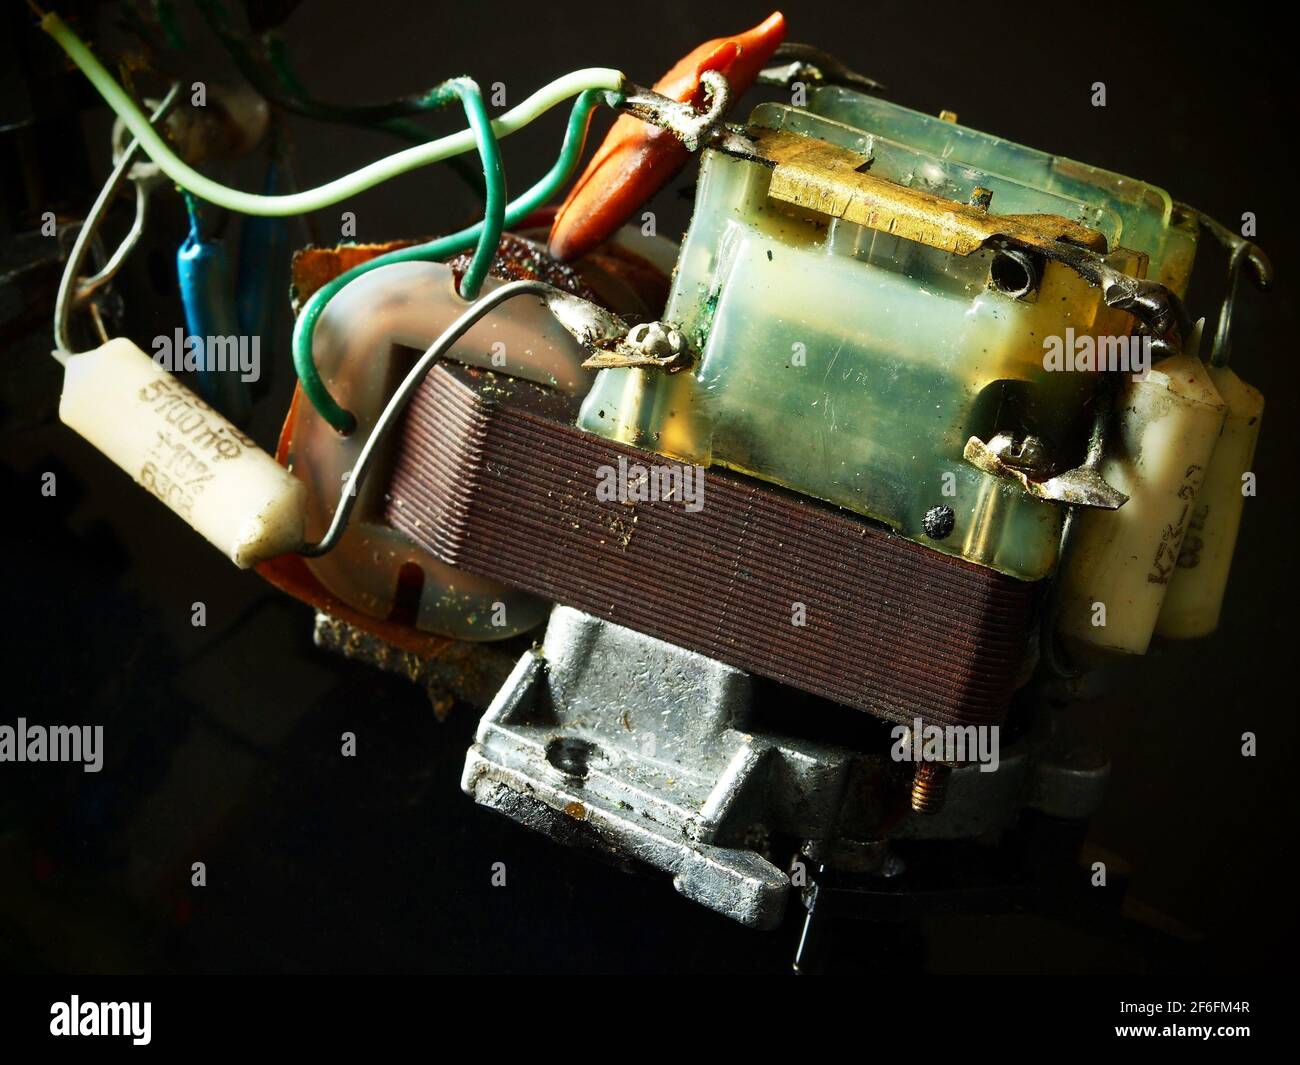 Vintage electricity tranformer with electronic components. Stock Photo